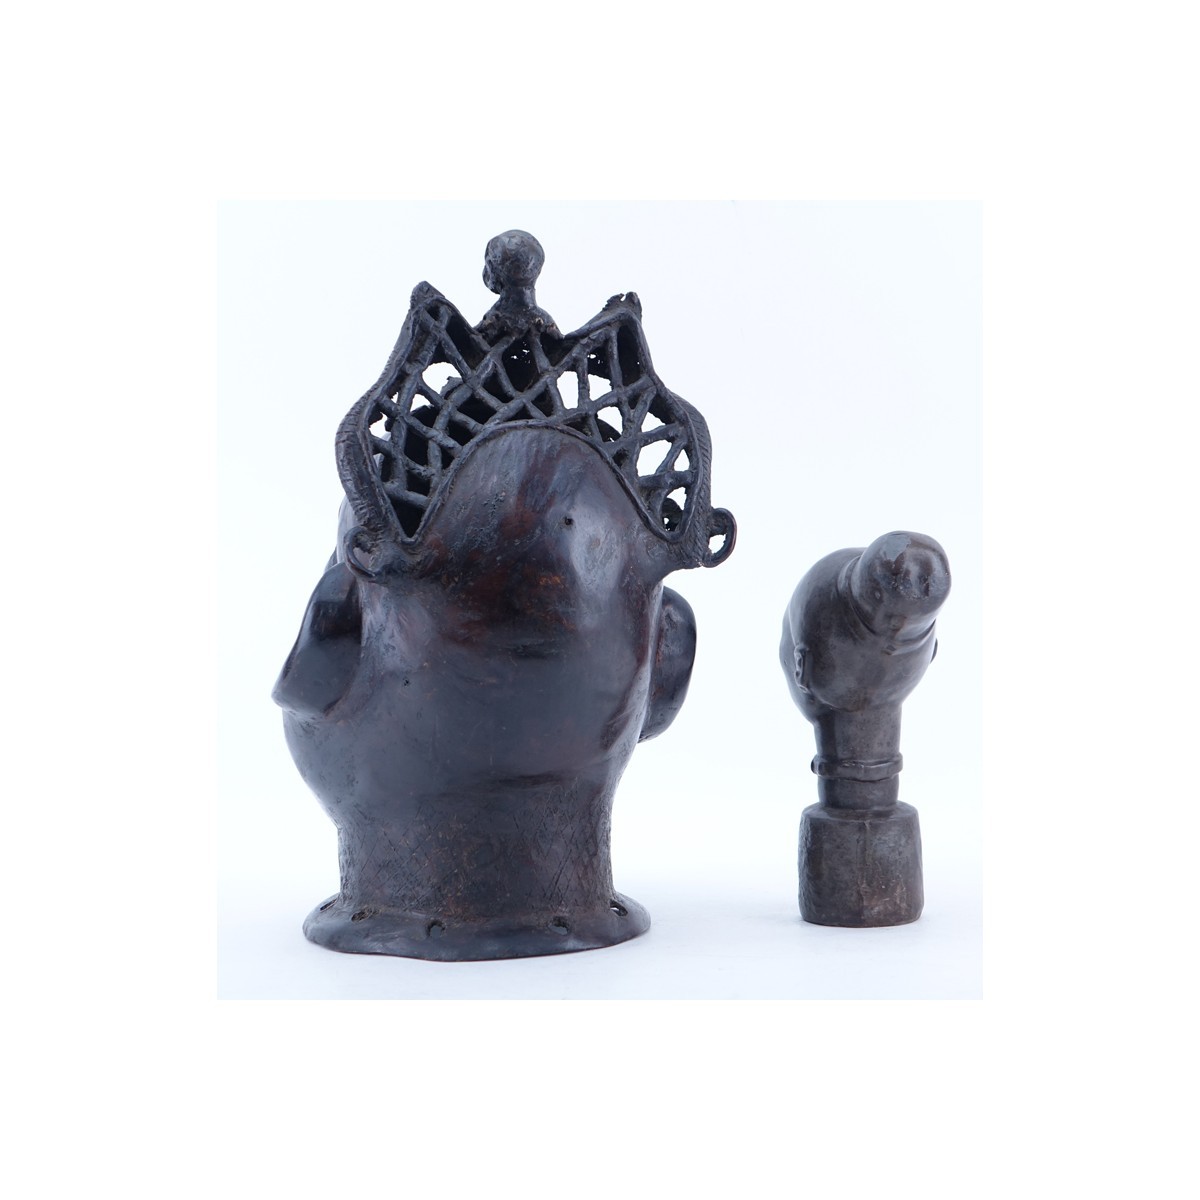 Group of Two (2): African Bronze Sculpture and a Stoneware Sculpture, Each 20th C. Heads of Benin. 